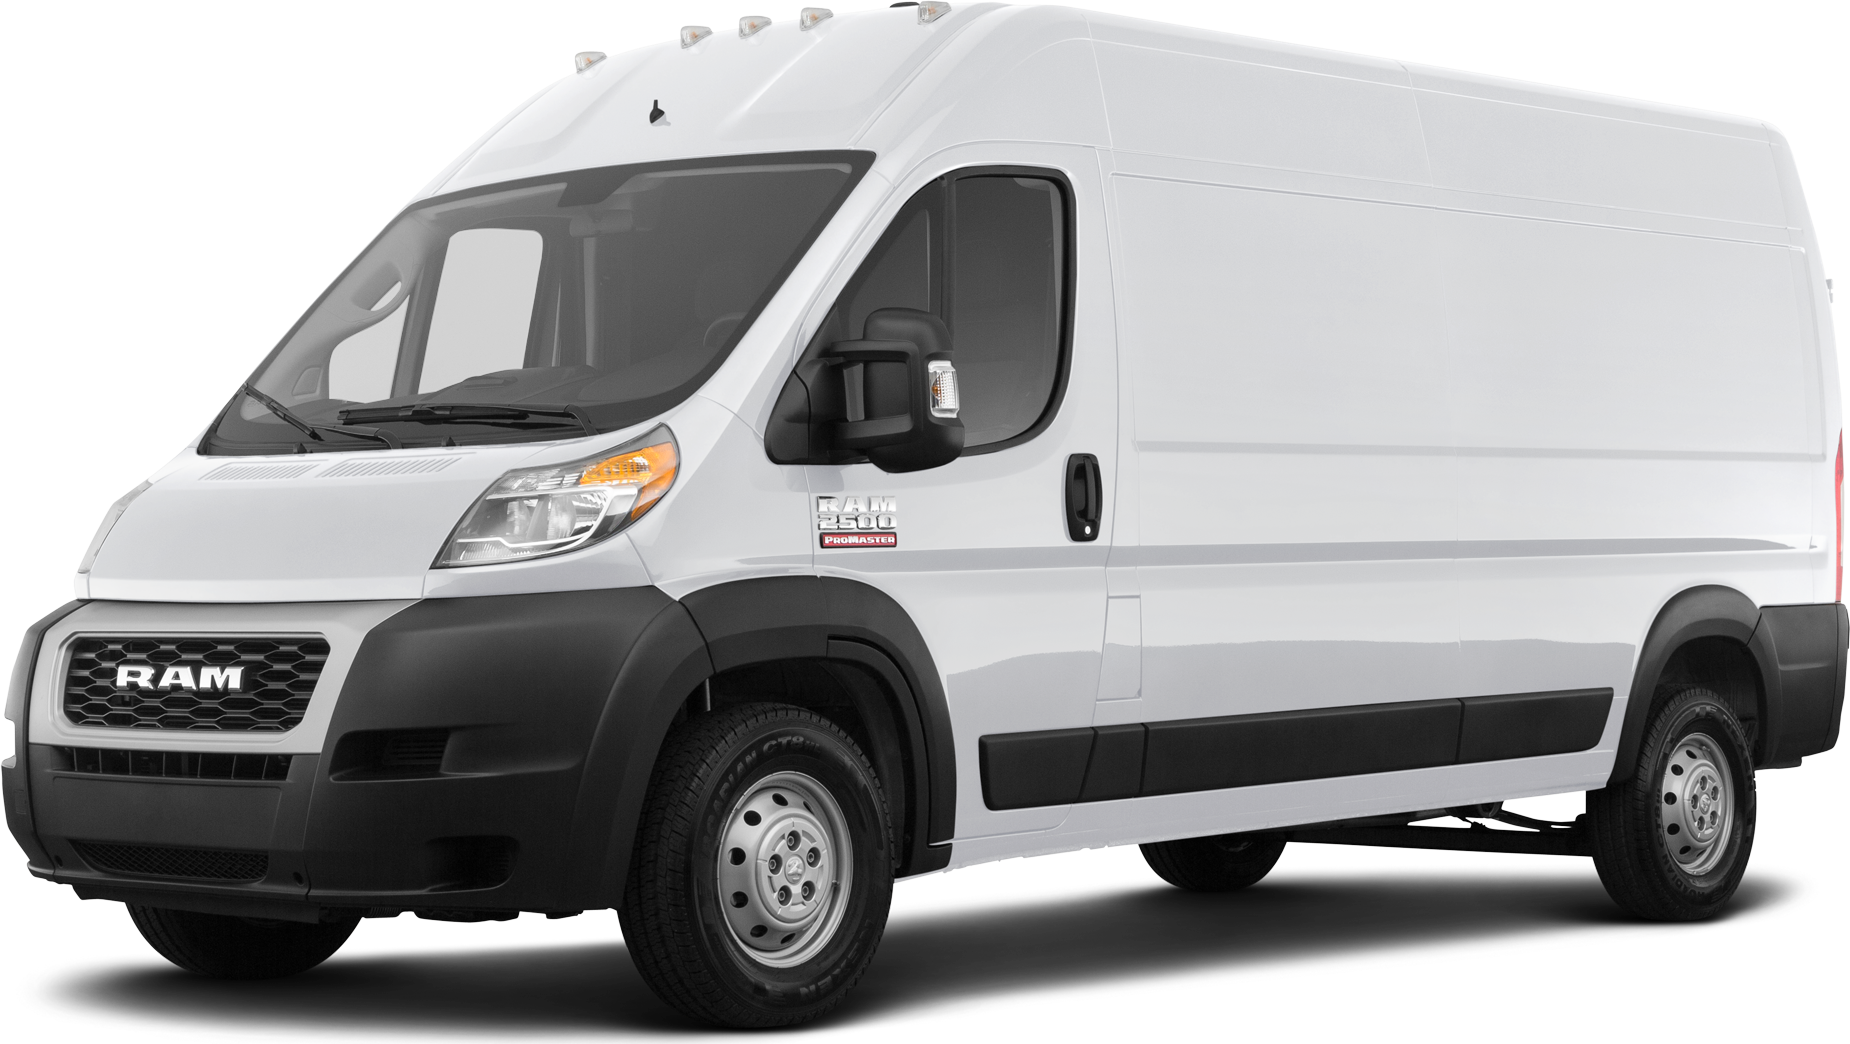 2021 Ram Promaster Reviews Pricing Specs Kelley Blue Book